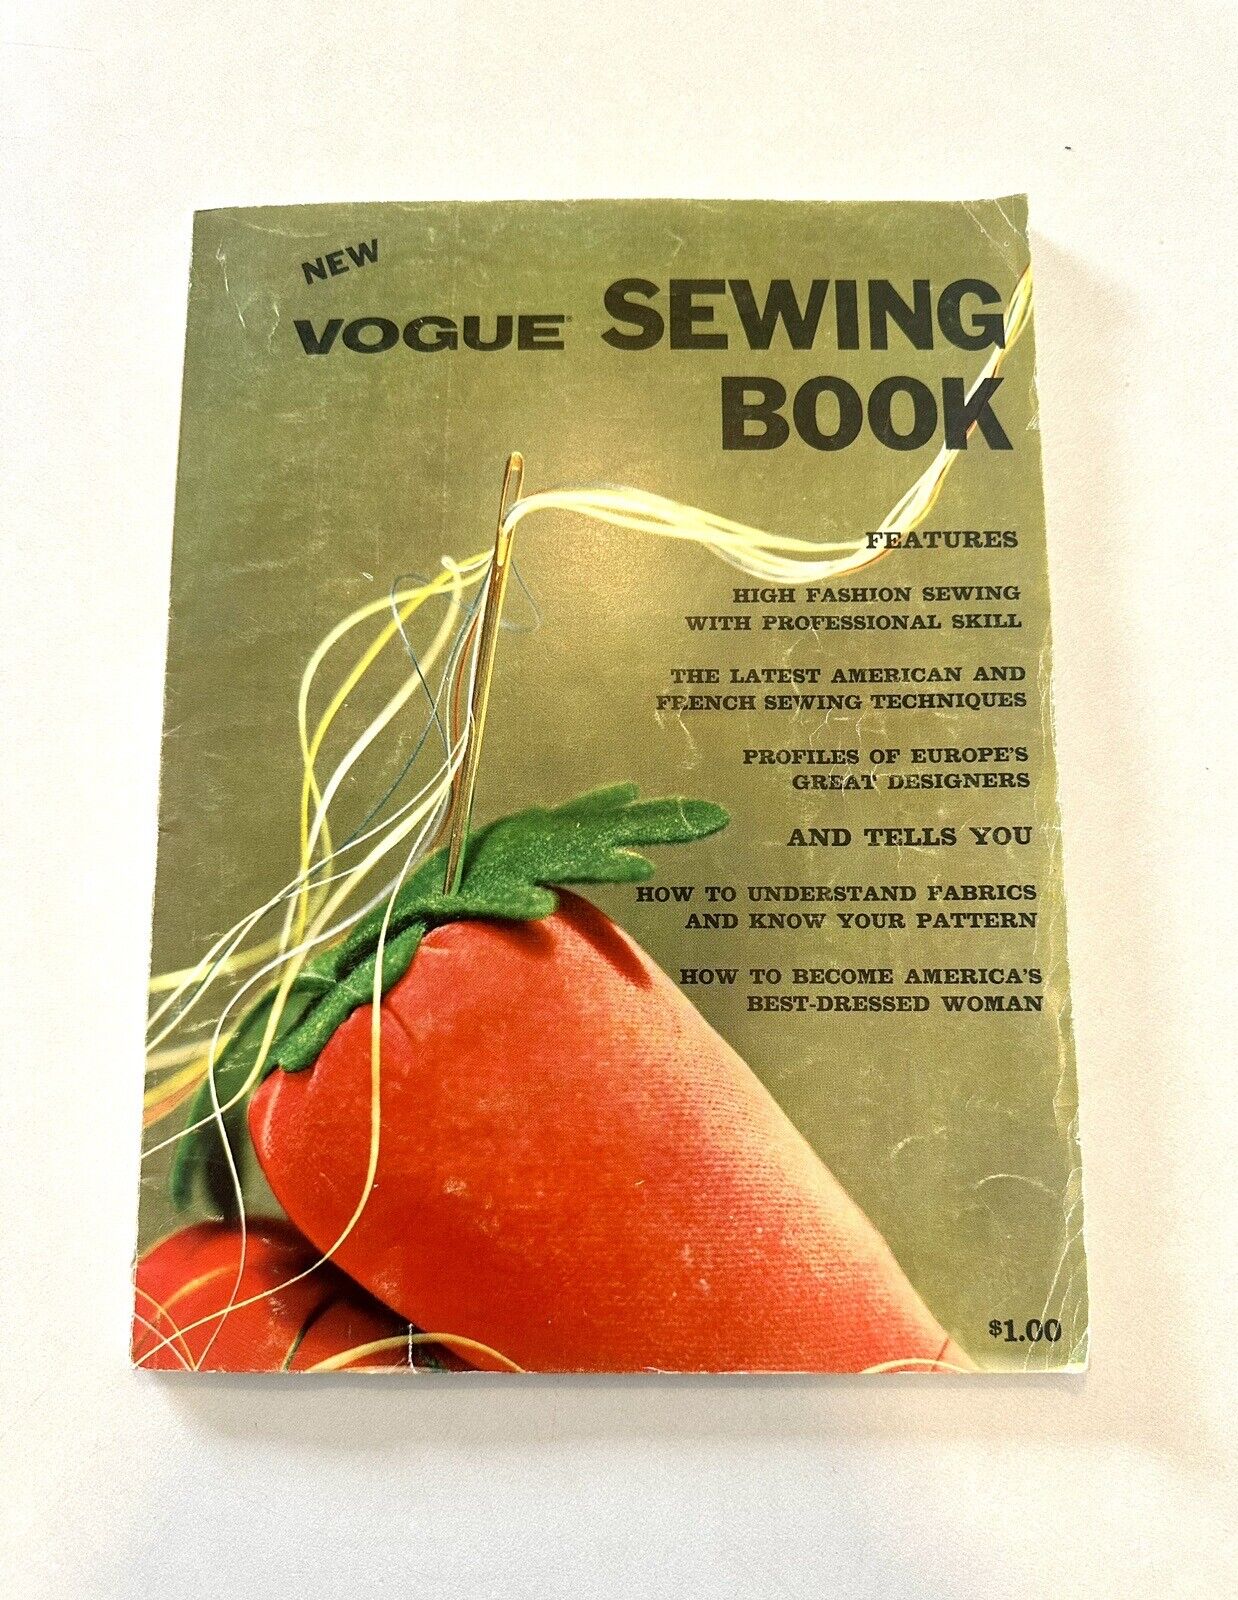 NEW VOGUE SEWING BOOK MAGAZINE BUTTERICK COMPANY NEW YORK VINTAGE 1964